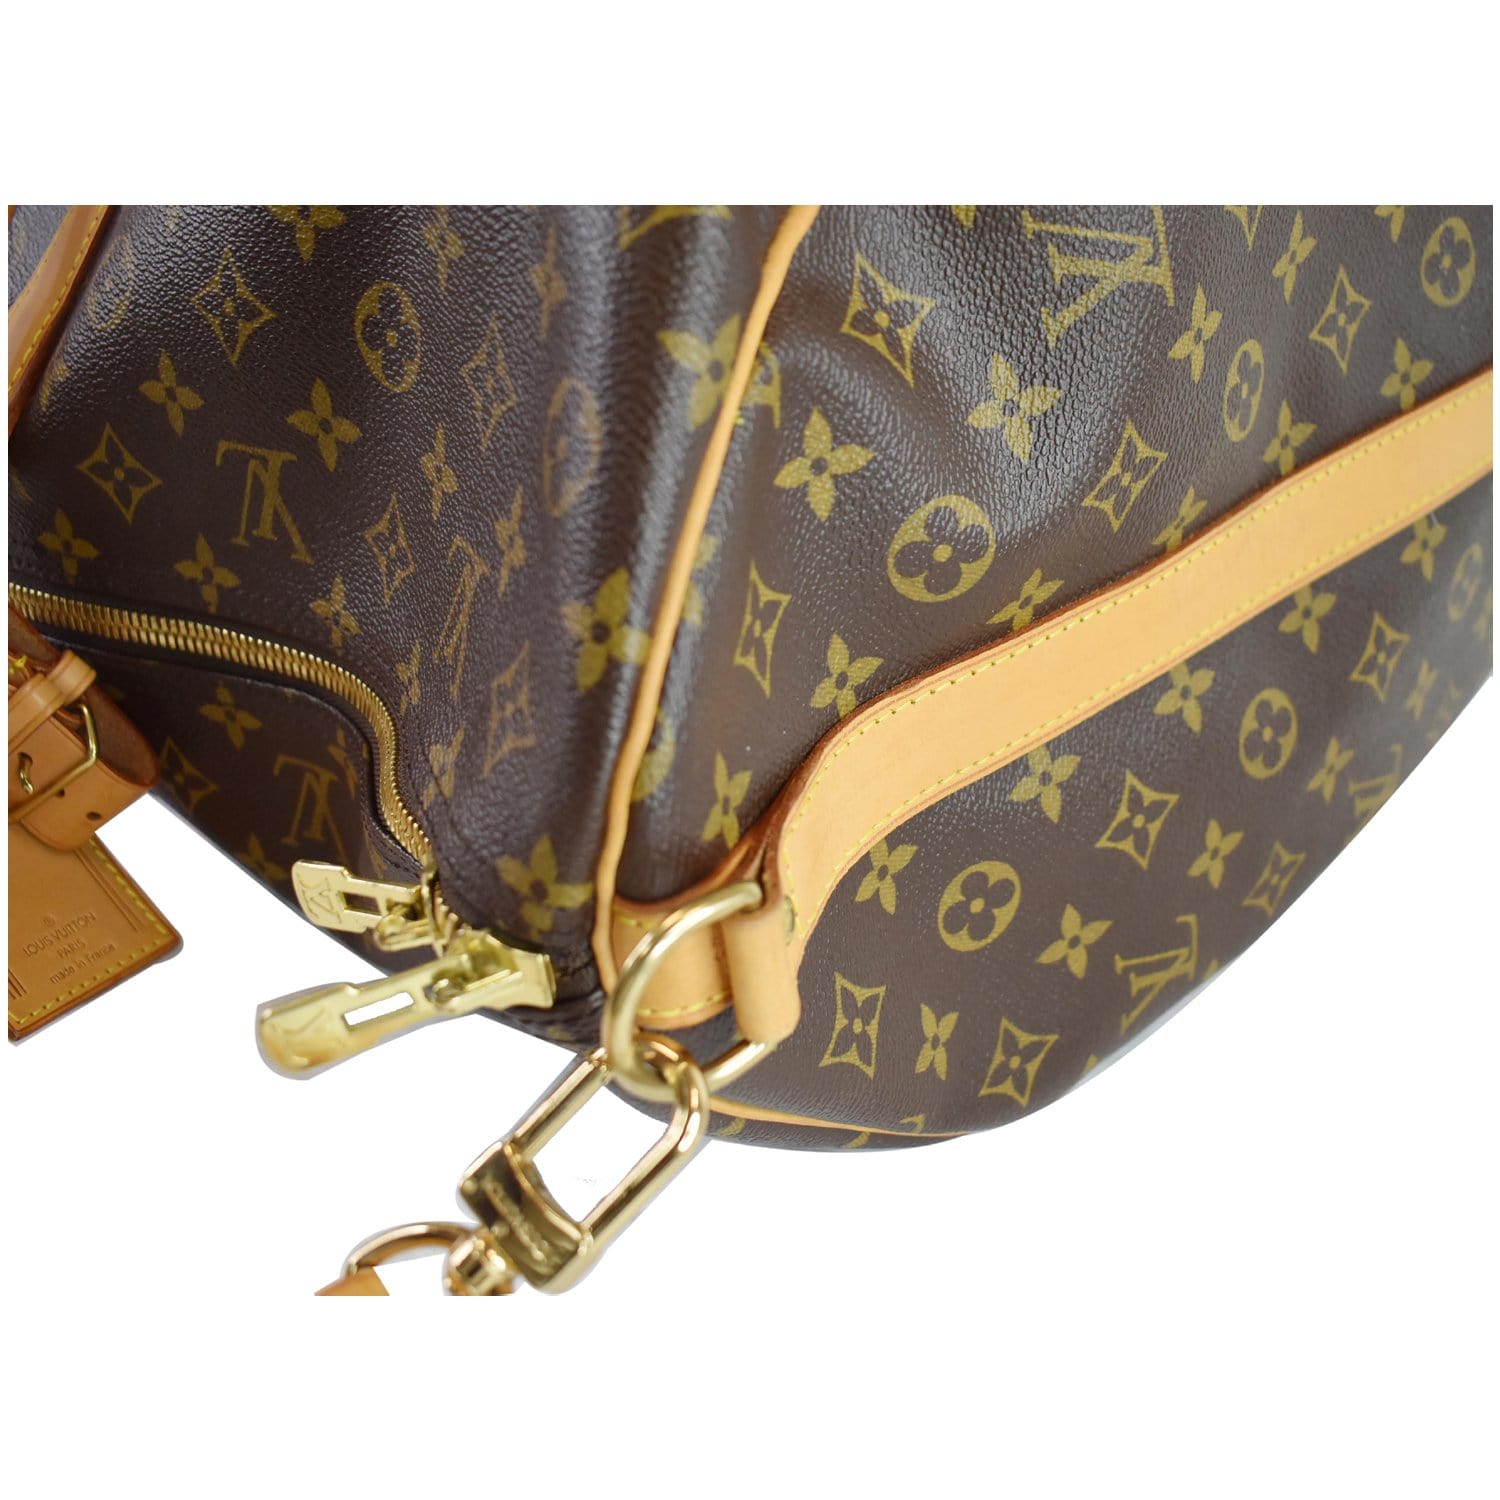 Products By Louis Vuitton : Keepall Bandoulière 60